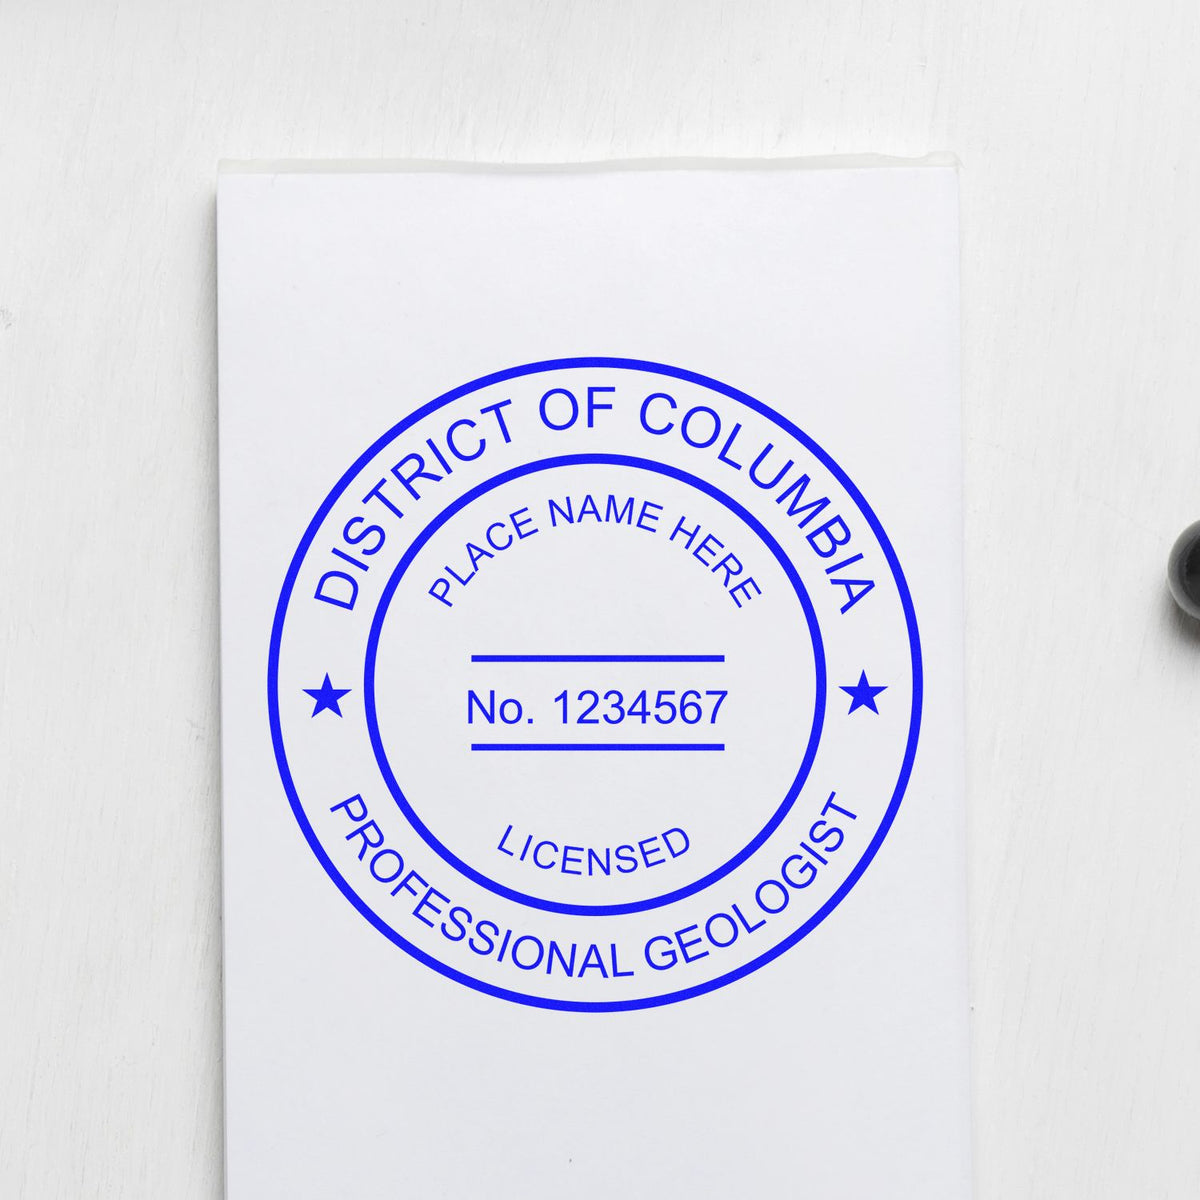 An alternative view of the Digital District of Columbia Geologist Stamp, Electronic Seal for District of Columbia Geologist stamped on a sheet of paper showing the image in use